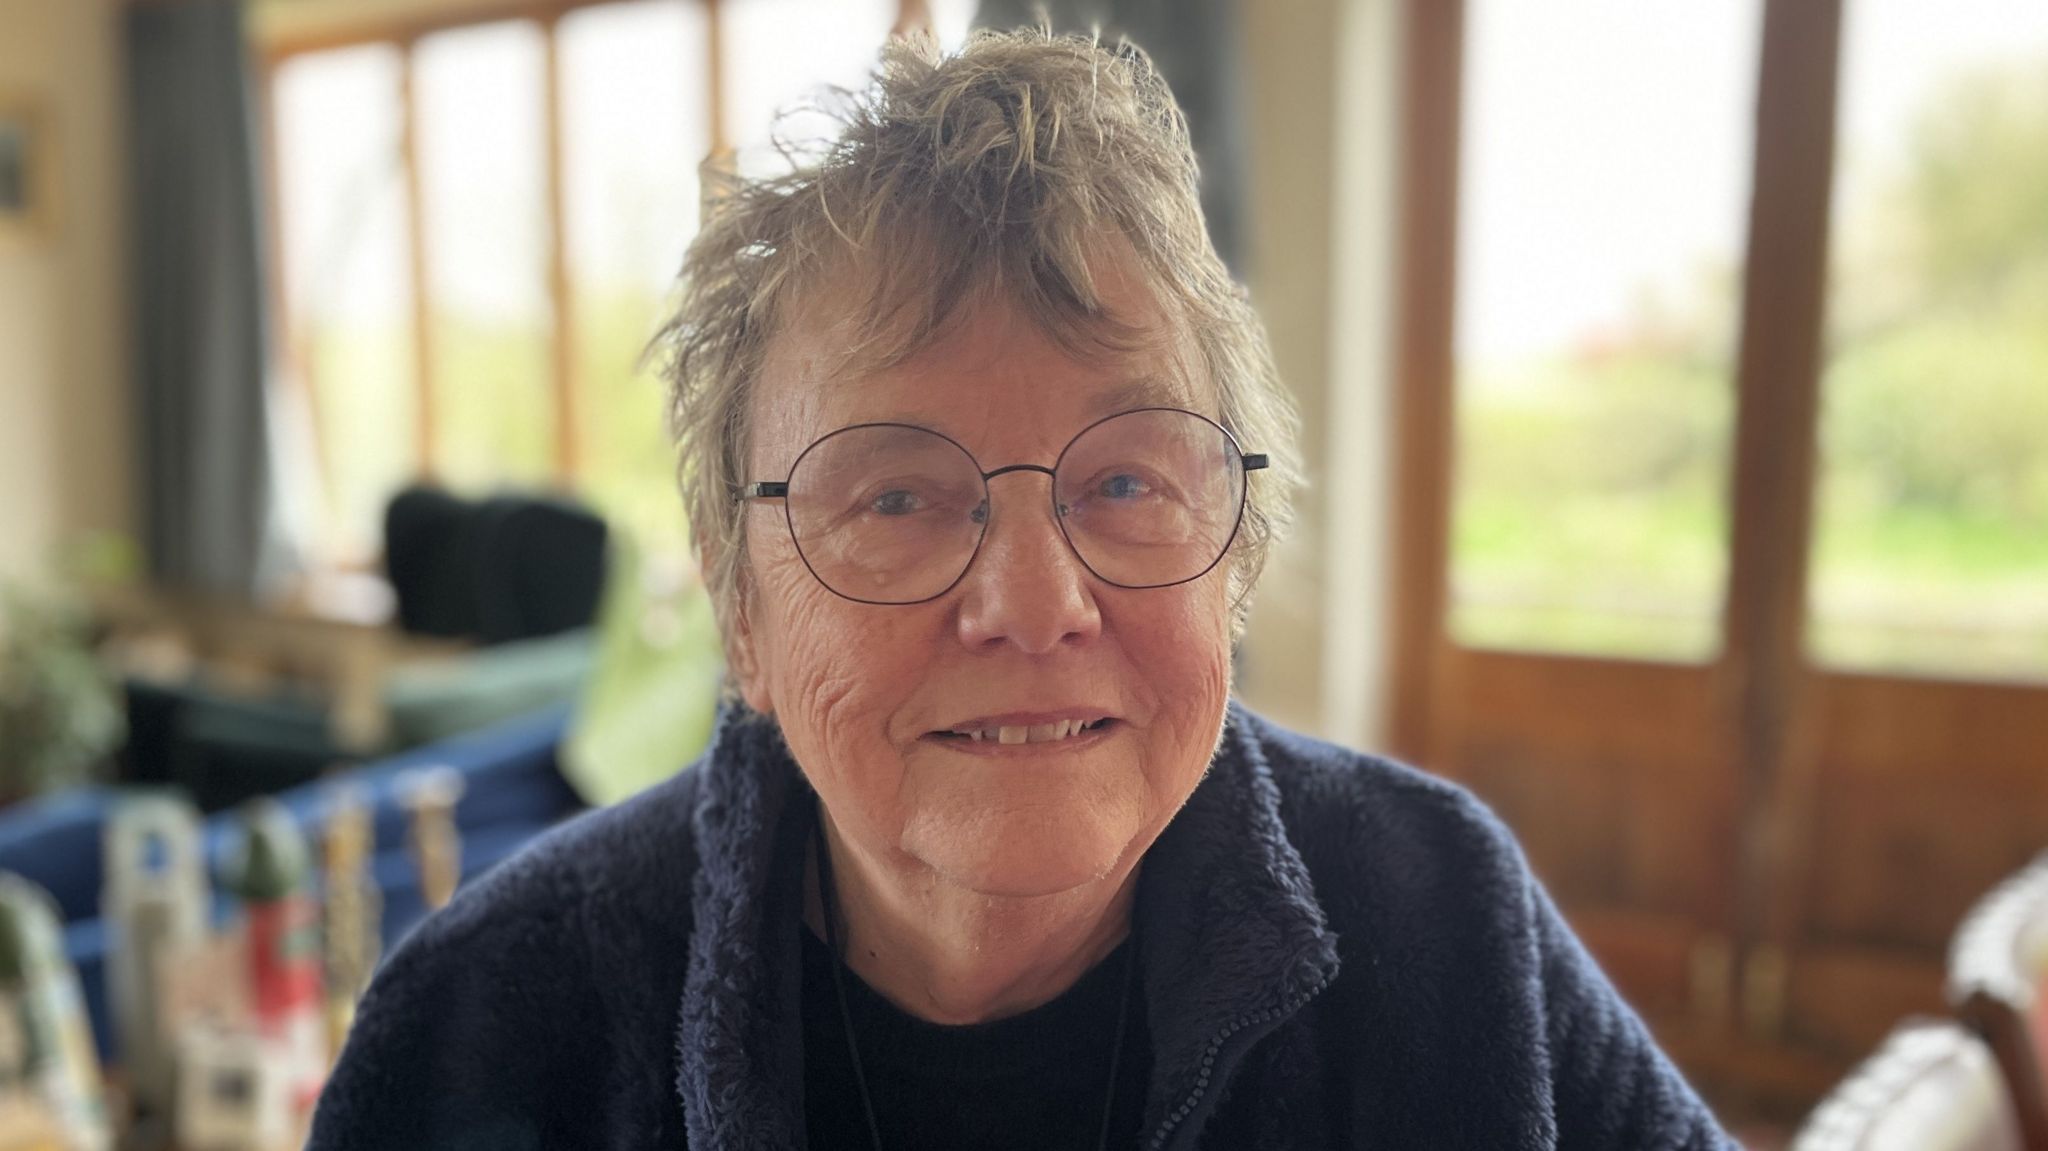 Local resident Lesley Bennett smiling wearing large round glasses with a thin black rim